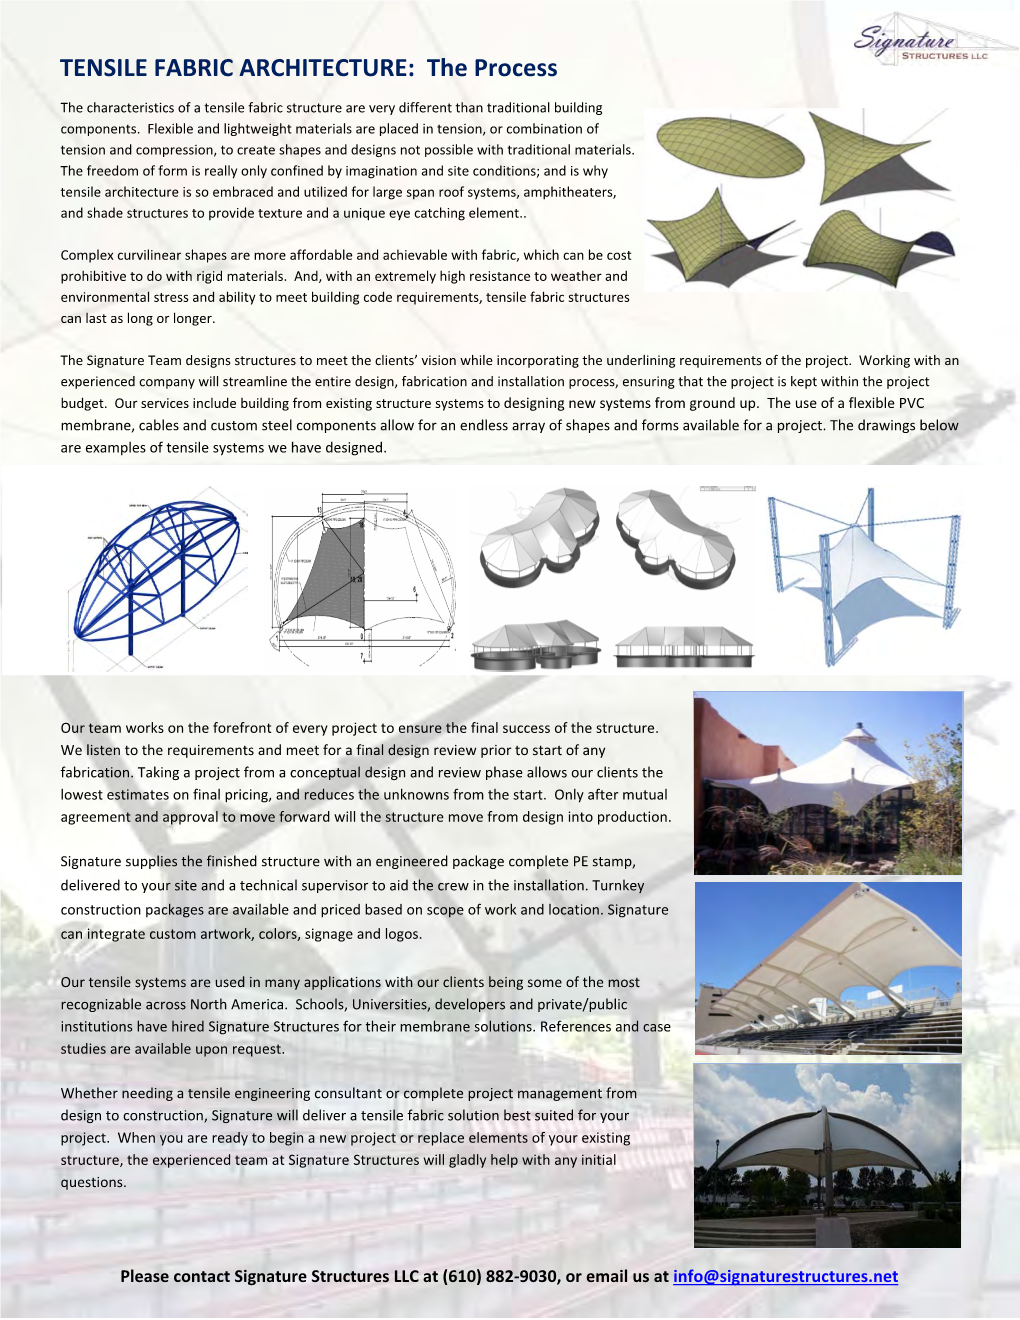 TENSILE FABRIC ARCHITECTURE: the Process the Characteristics of a Tensile Fabric Structure Are Very Different Than Traditional Building Components